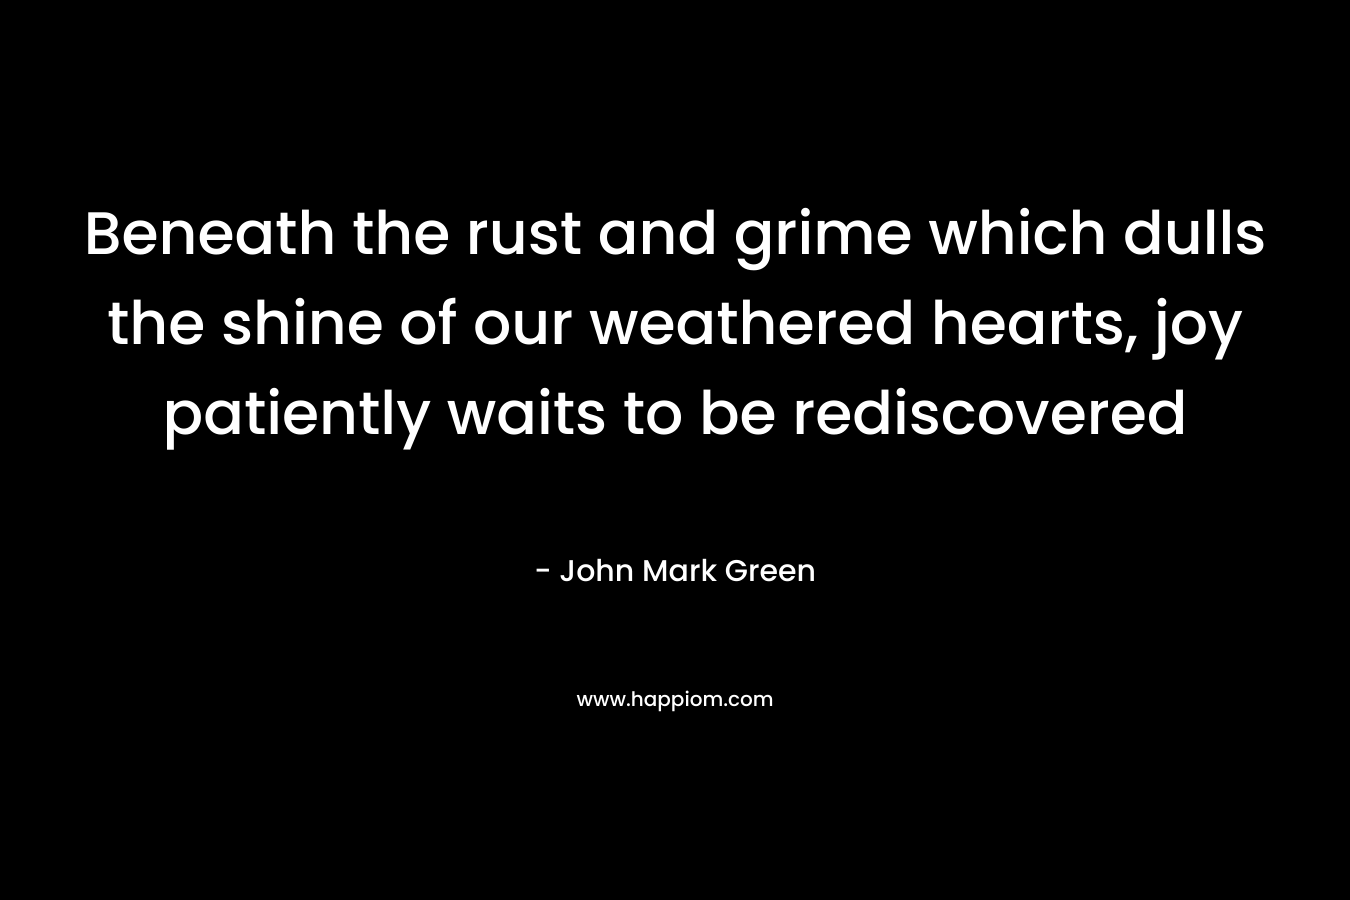 Beneath the rust and grime which dulls the shine of our weathered hearts, joy patiently waits to be rediscovered – John Mark Green